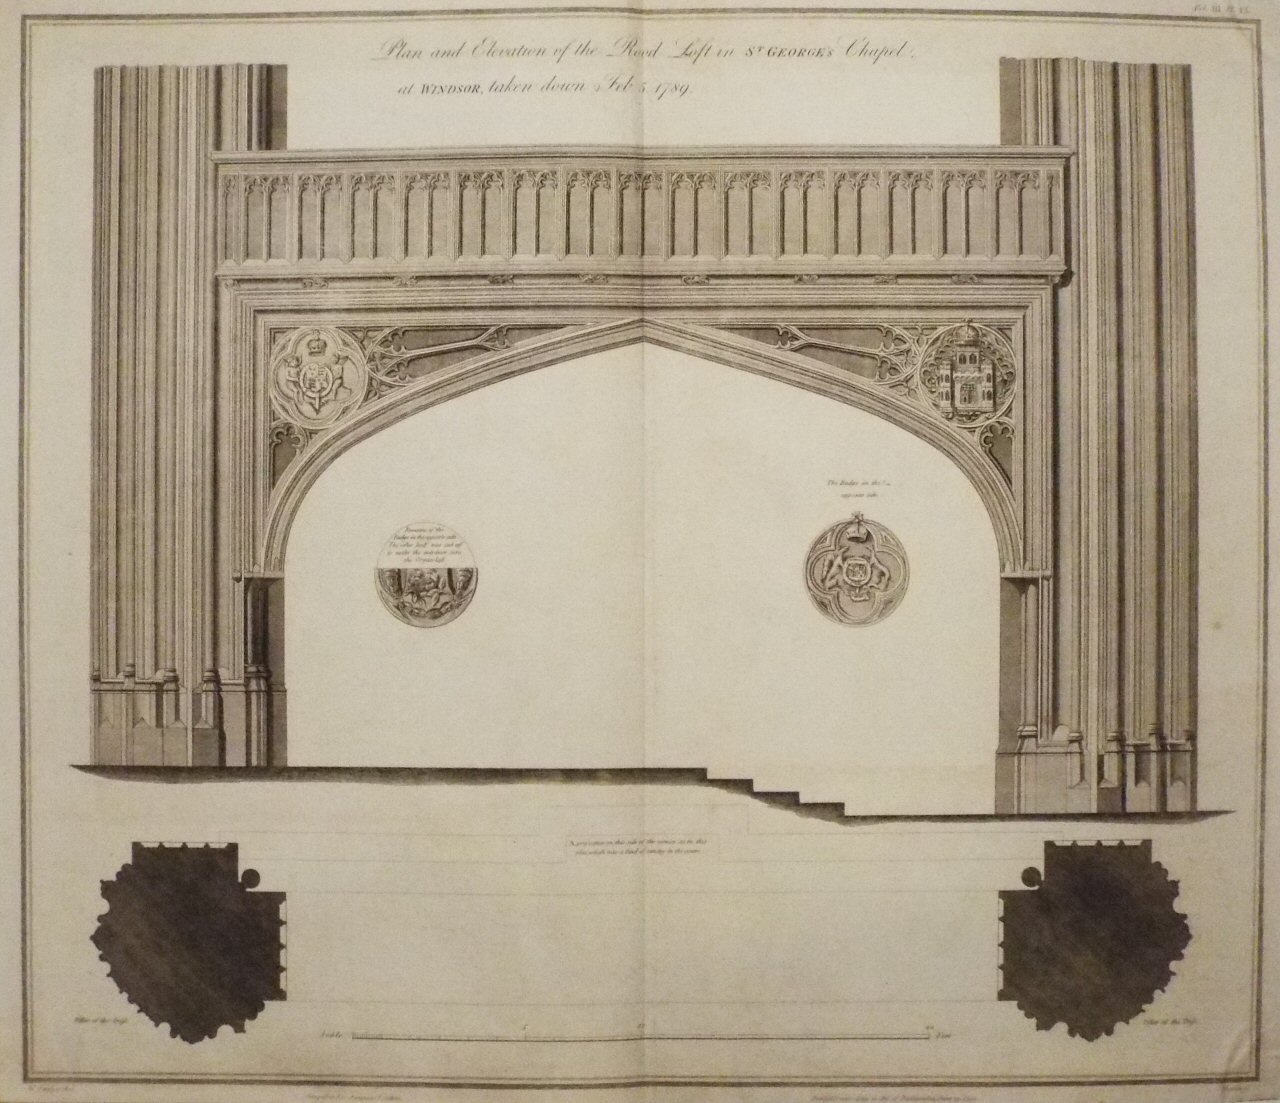 Print - Plan and Elevation of the Rood Loft in St. George's Castle, at Windsor, taken down Feb 5, 1789. - 